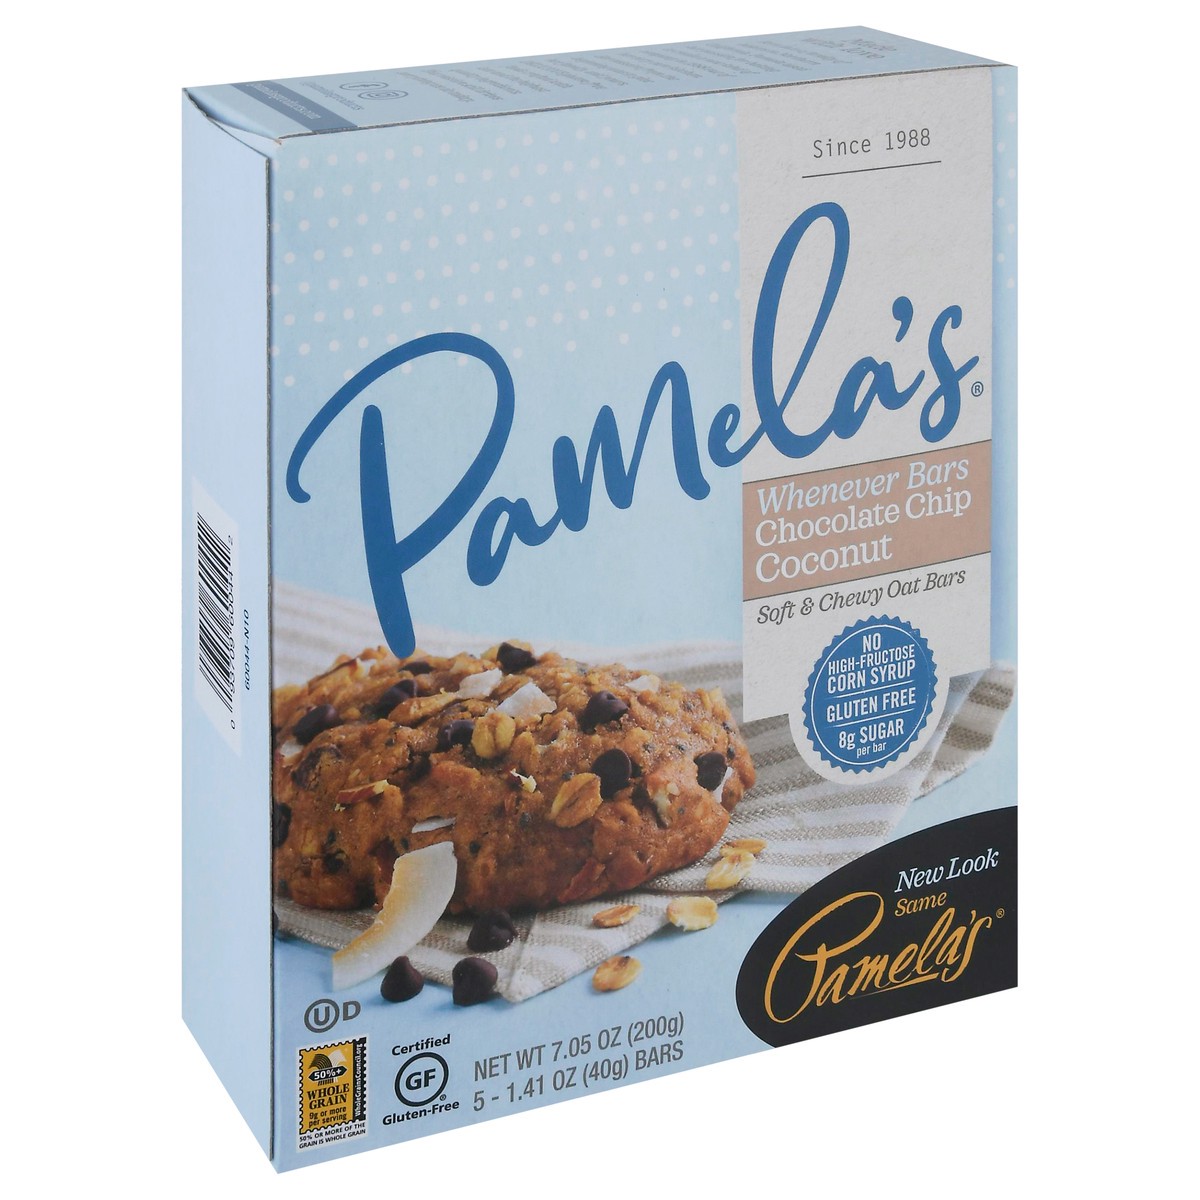 slide 2 of 9, Pamela's Whenever Bars Soft & Chewy Chocolate Chip Coconut Oat Bars 5 - 1.41 oz Bars, 7.05 oz